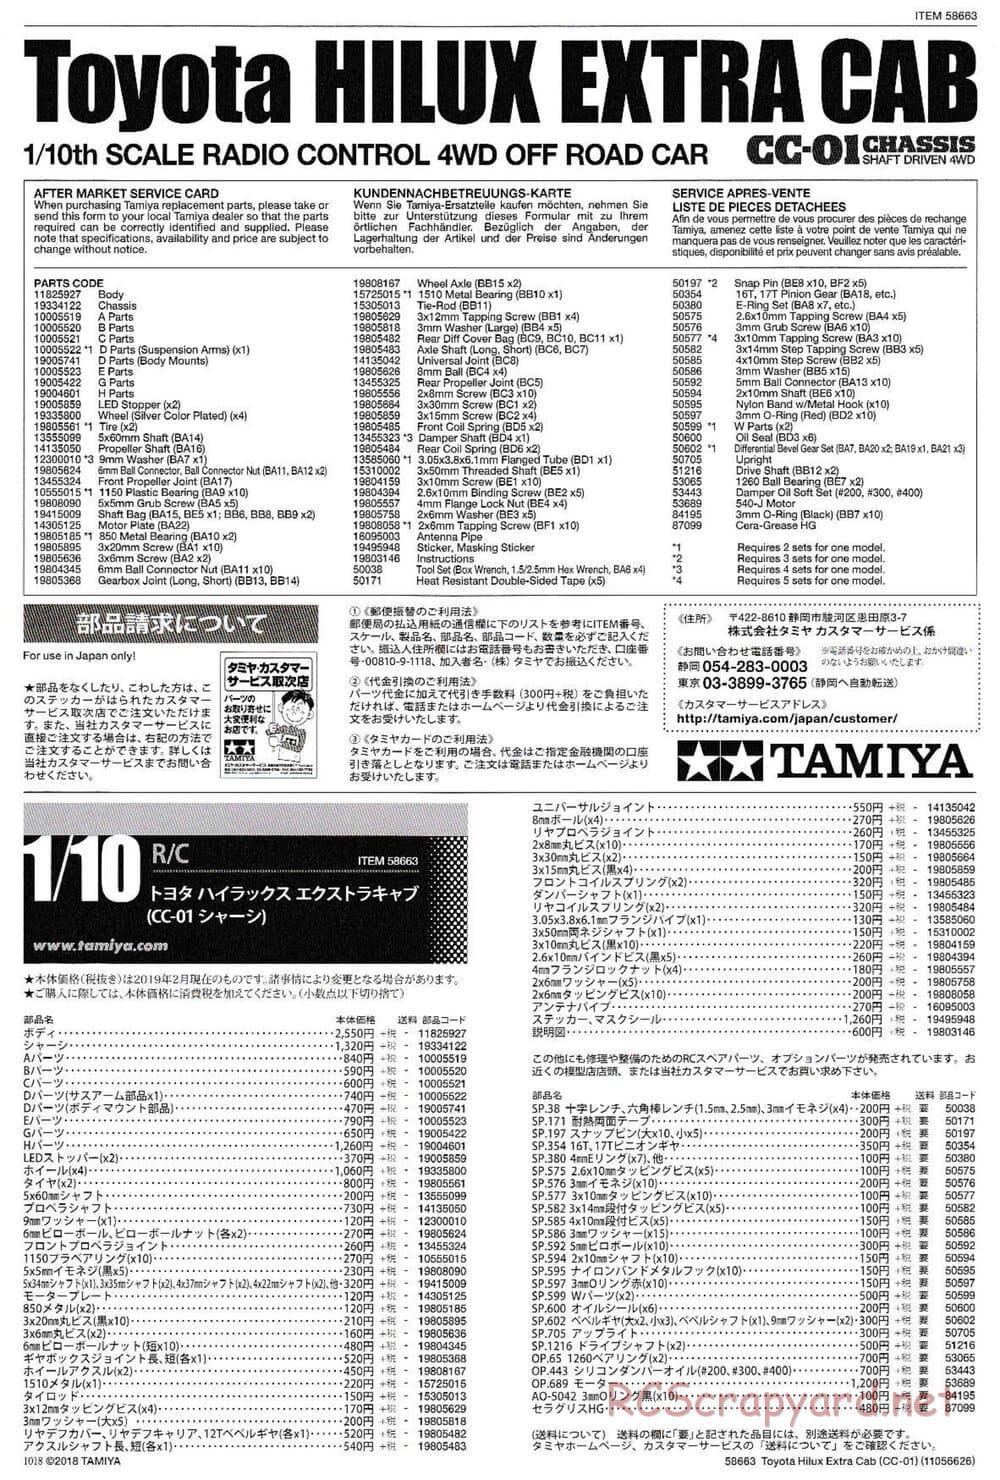 Tamiya - Toyota Hilux Extra Cab - CC-01 Chassis - Manual - Page 25